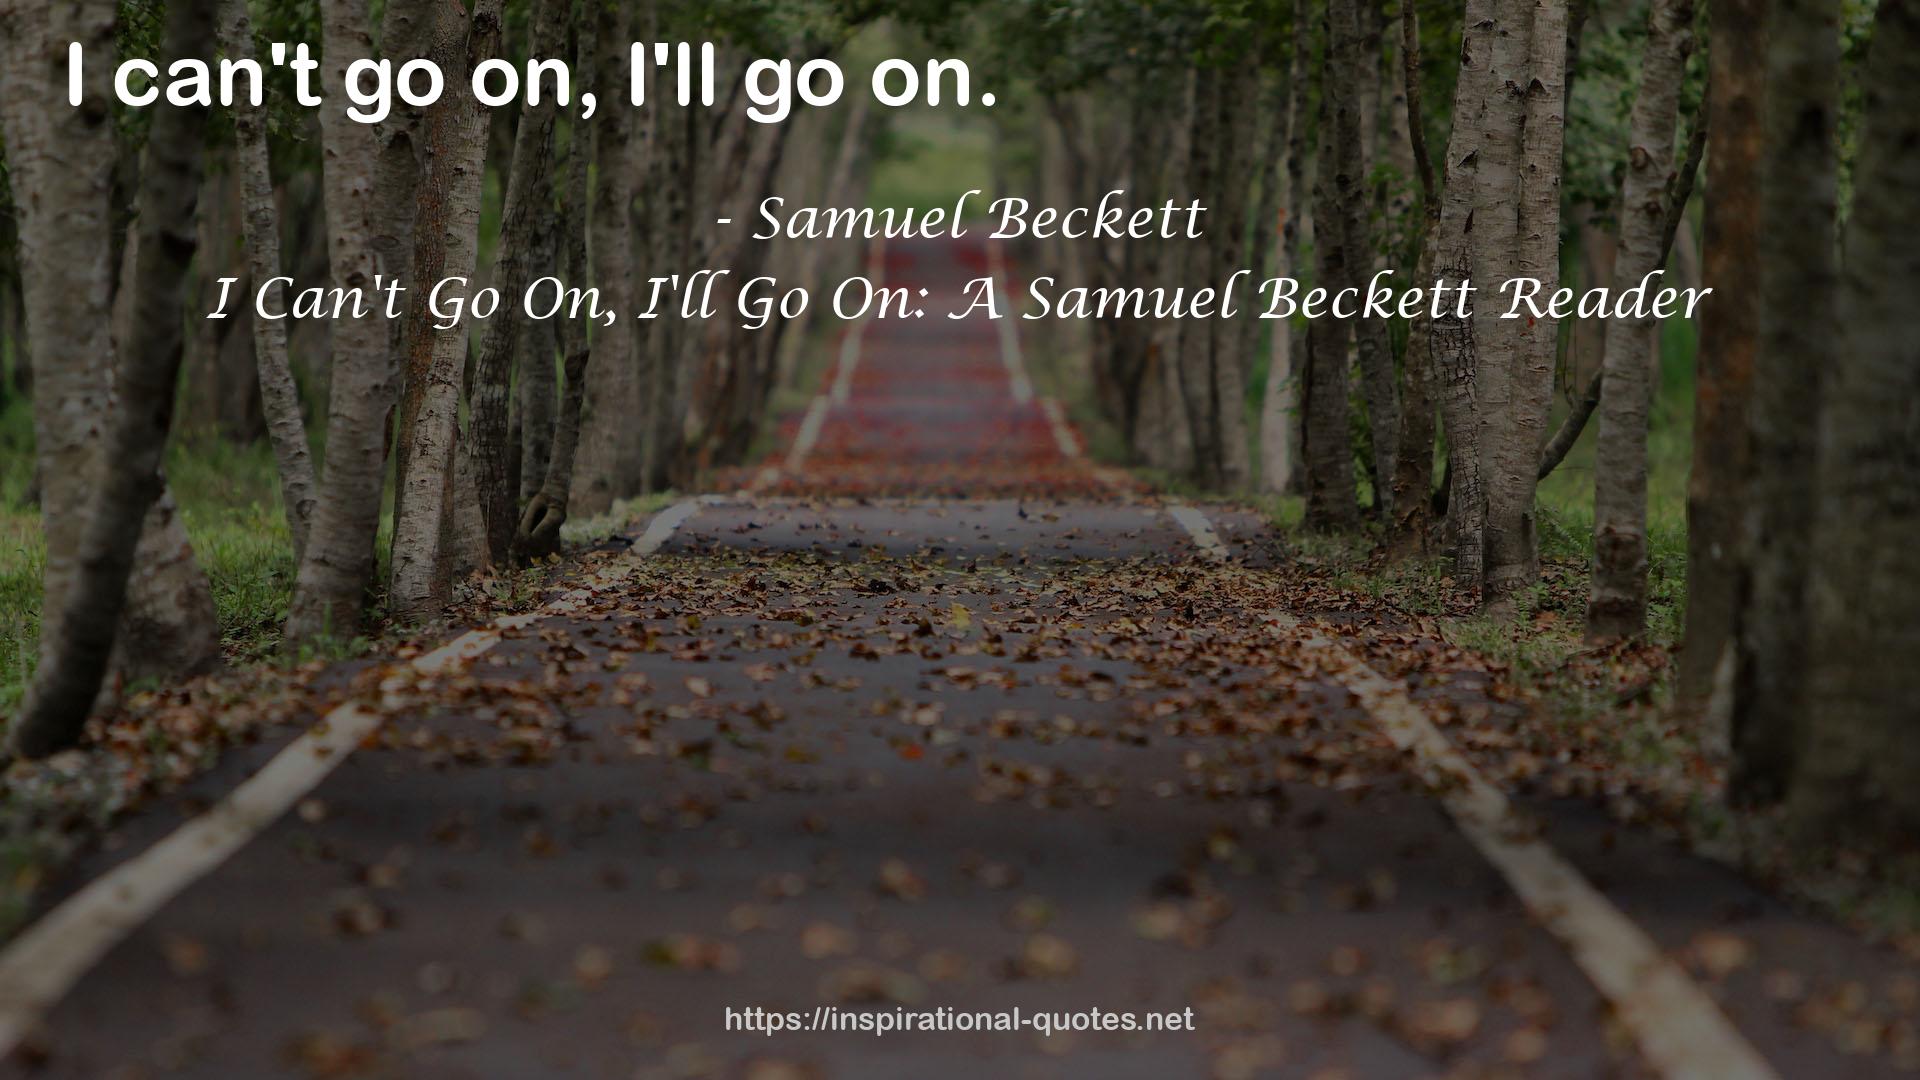 I Can't Go On, I'll Go On: A Samuel Beckett Reader QUOTES